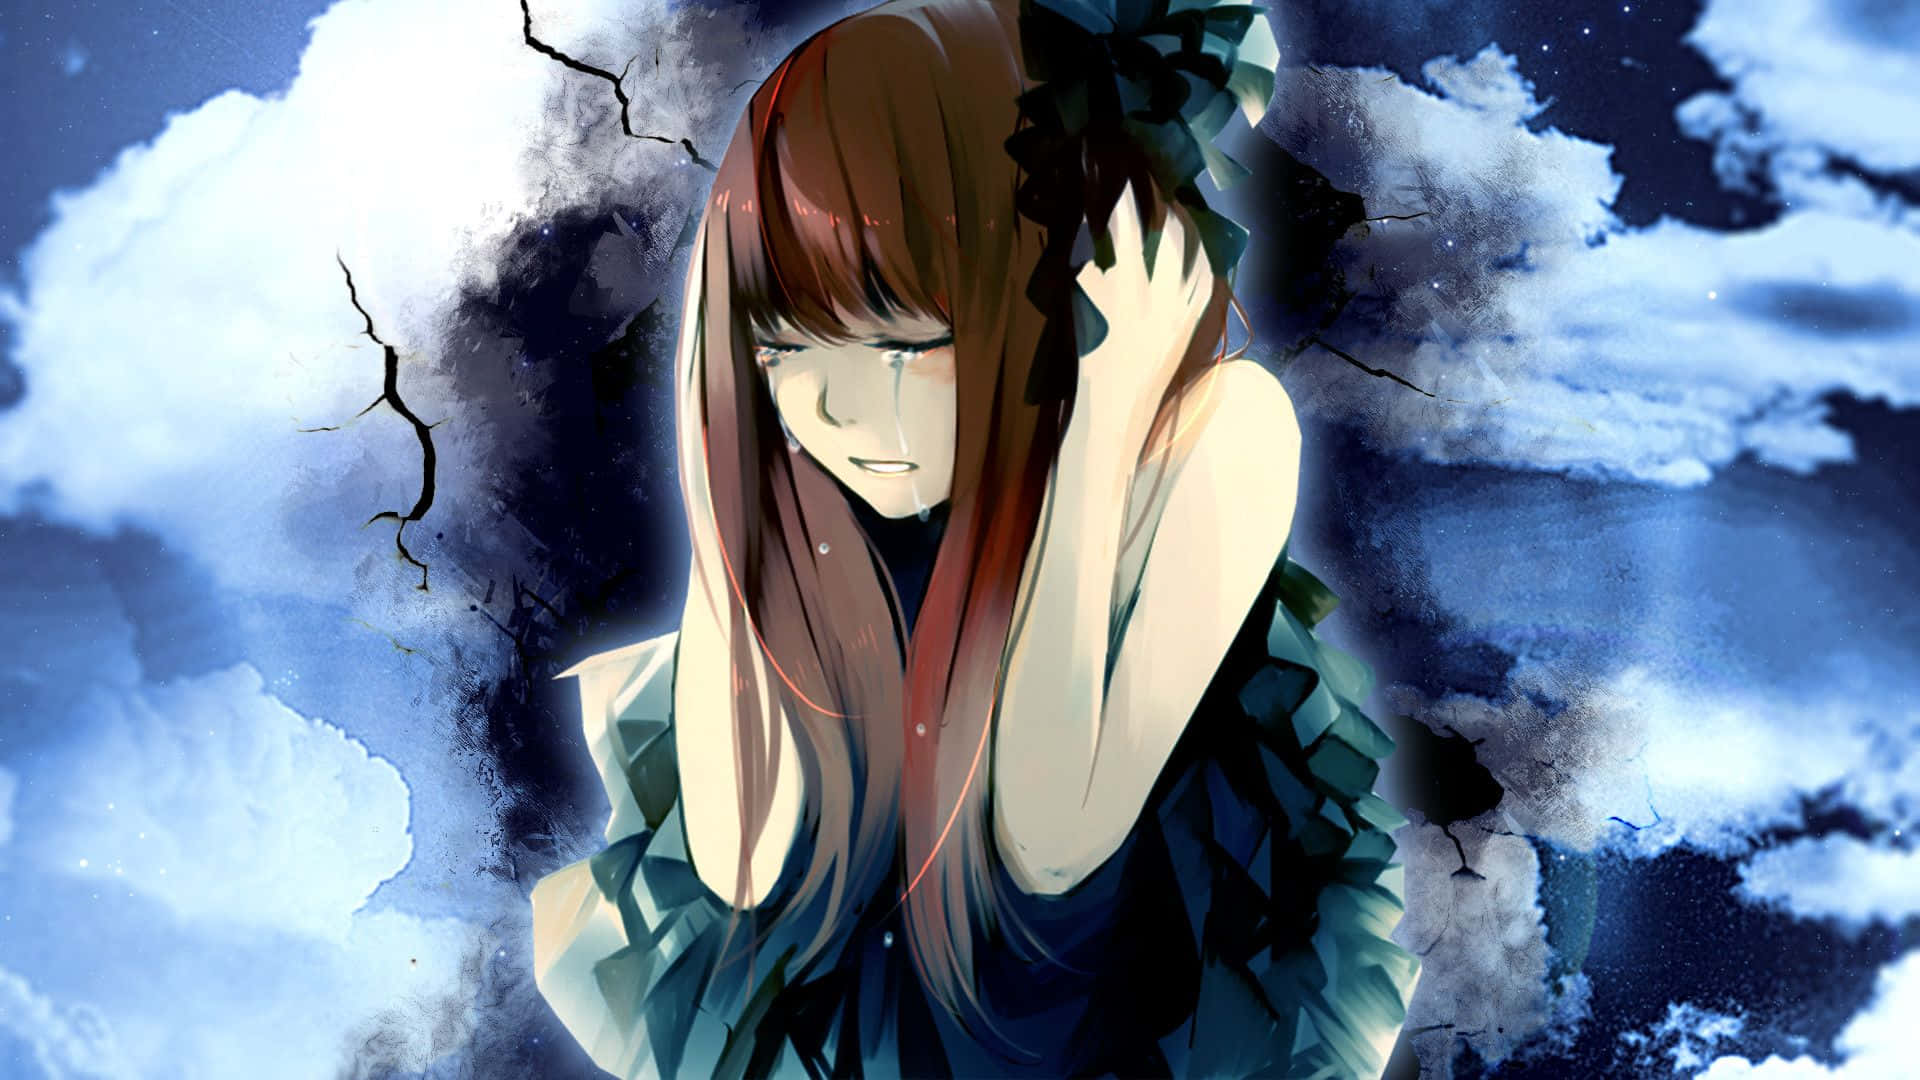 A Sad Anime Girl with Cool Artistic Expression Wallpaper